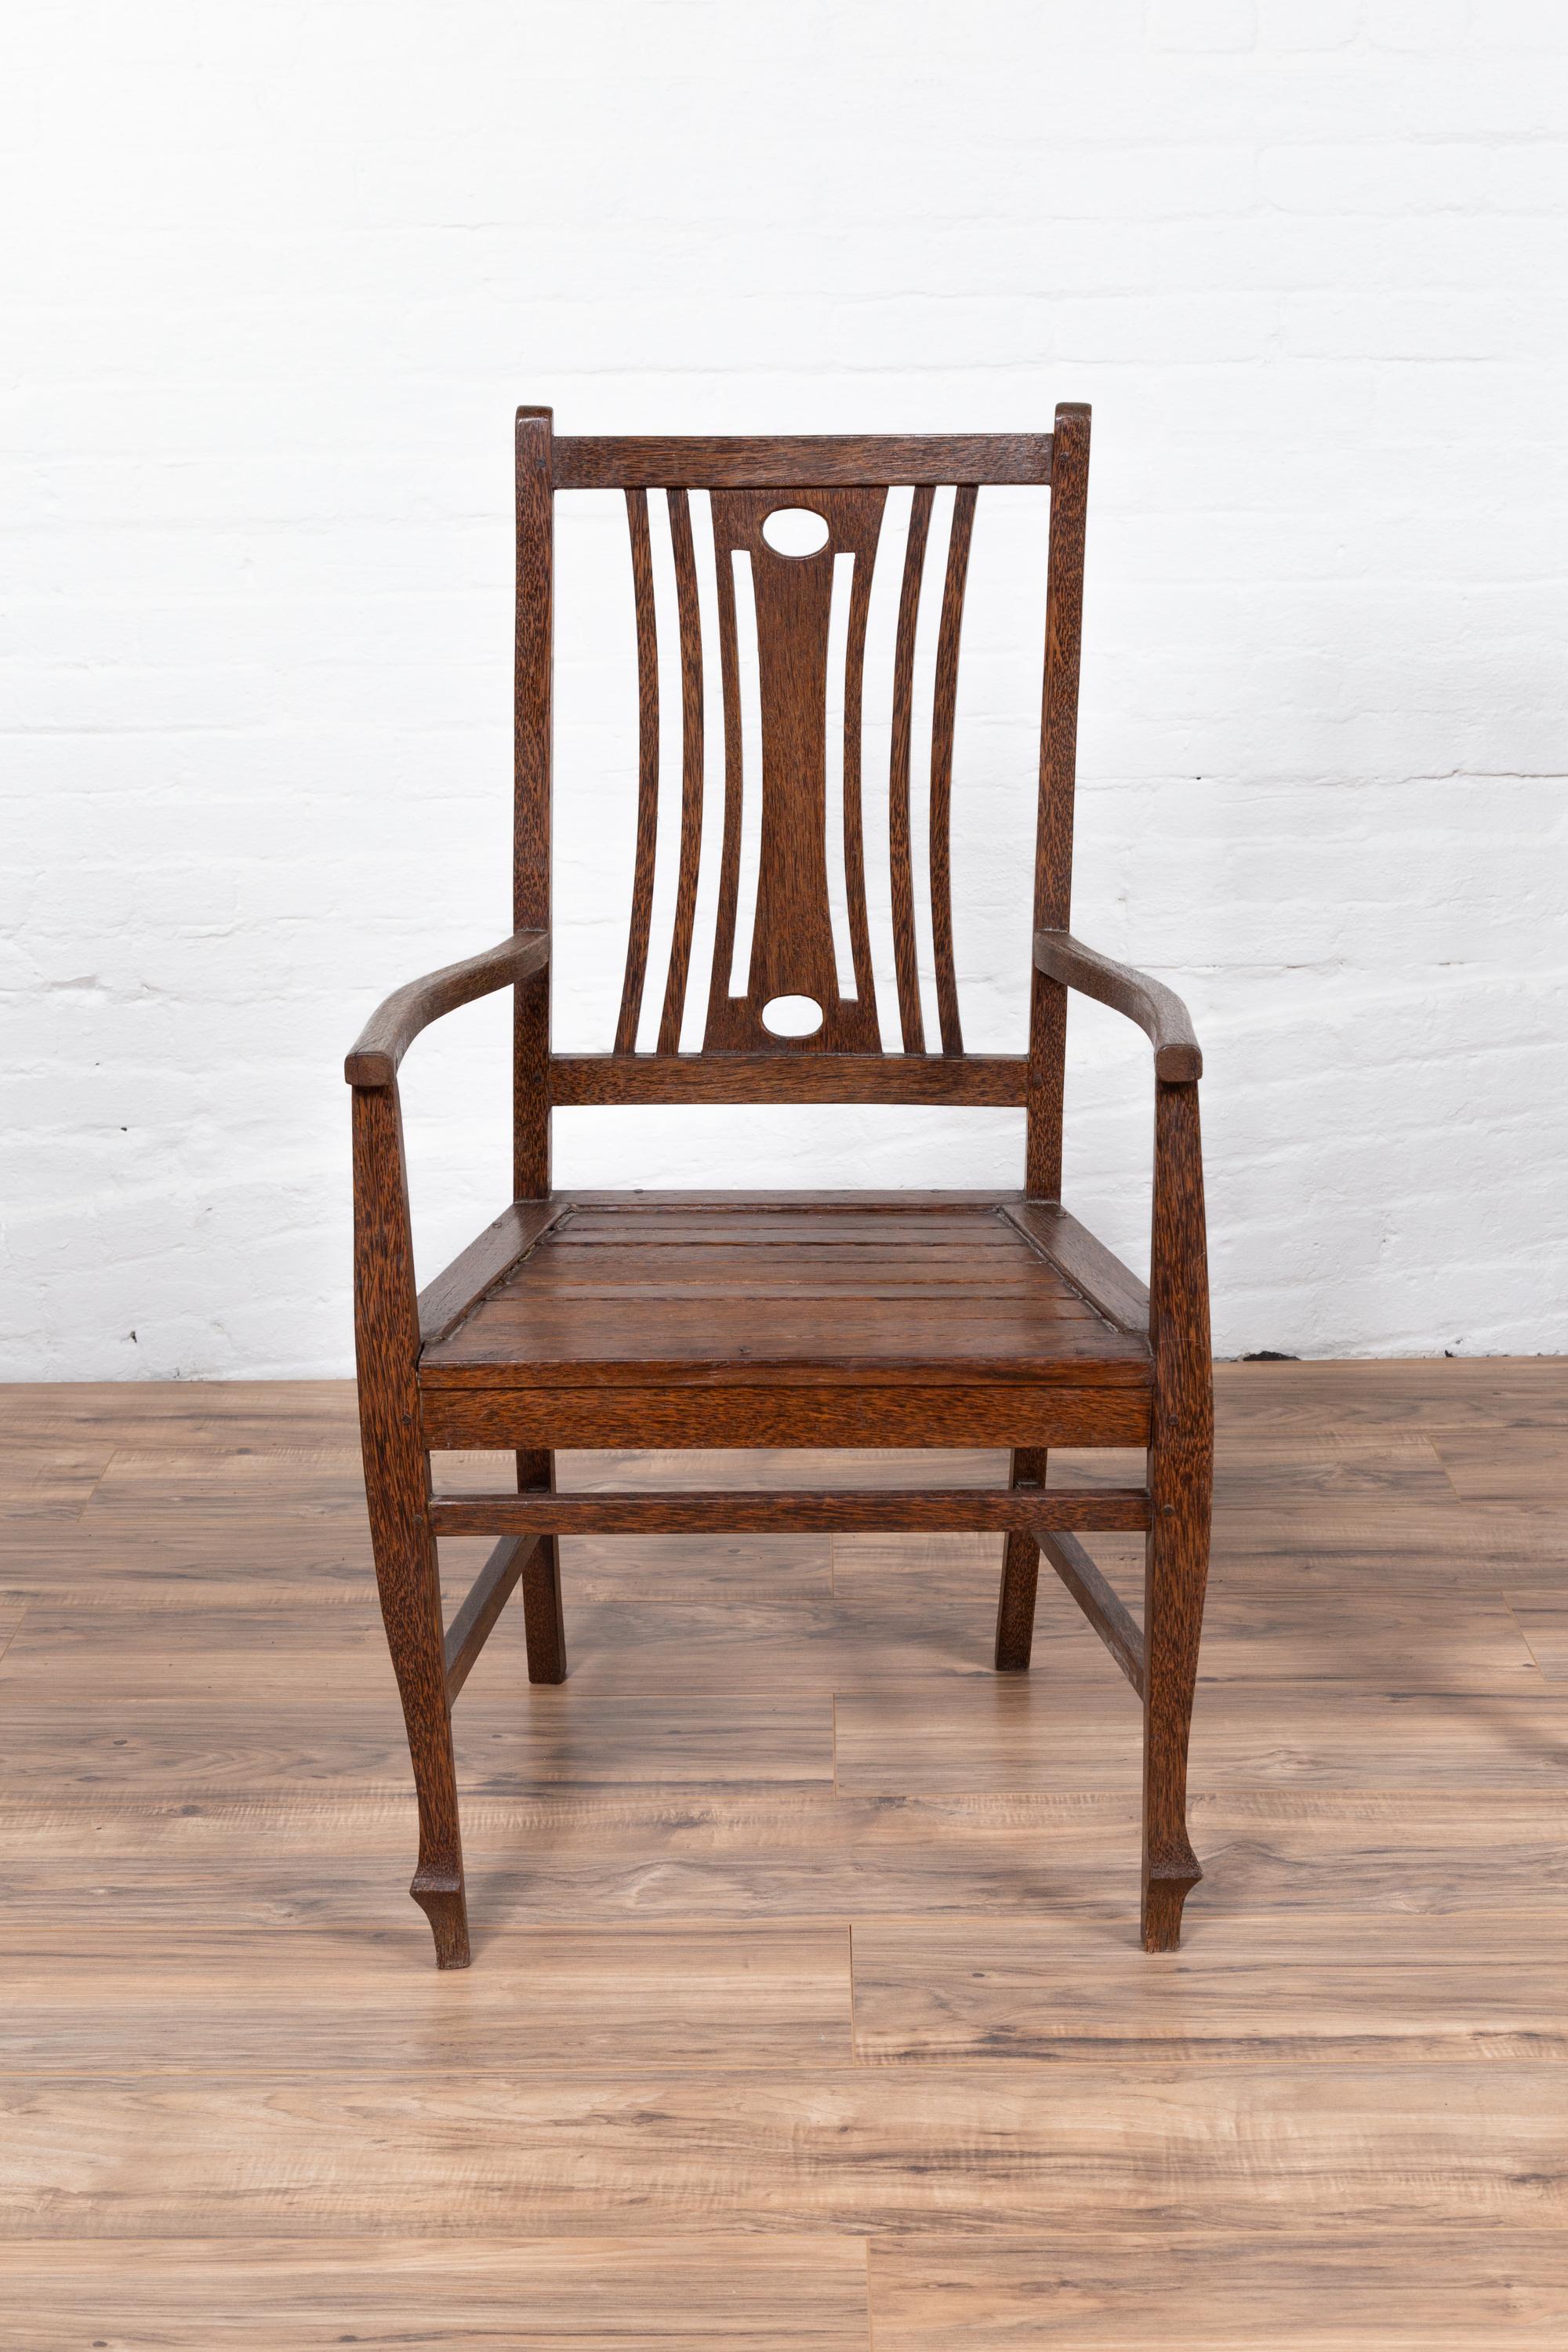 A vintage Dutch Colonial armchair from the mid-20th century, with pierced back splat and wooden slats on the seat. We currently have five chairs available, priced and sold individually. Born in Indonesia during the mid-century period, this Dutch